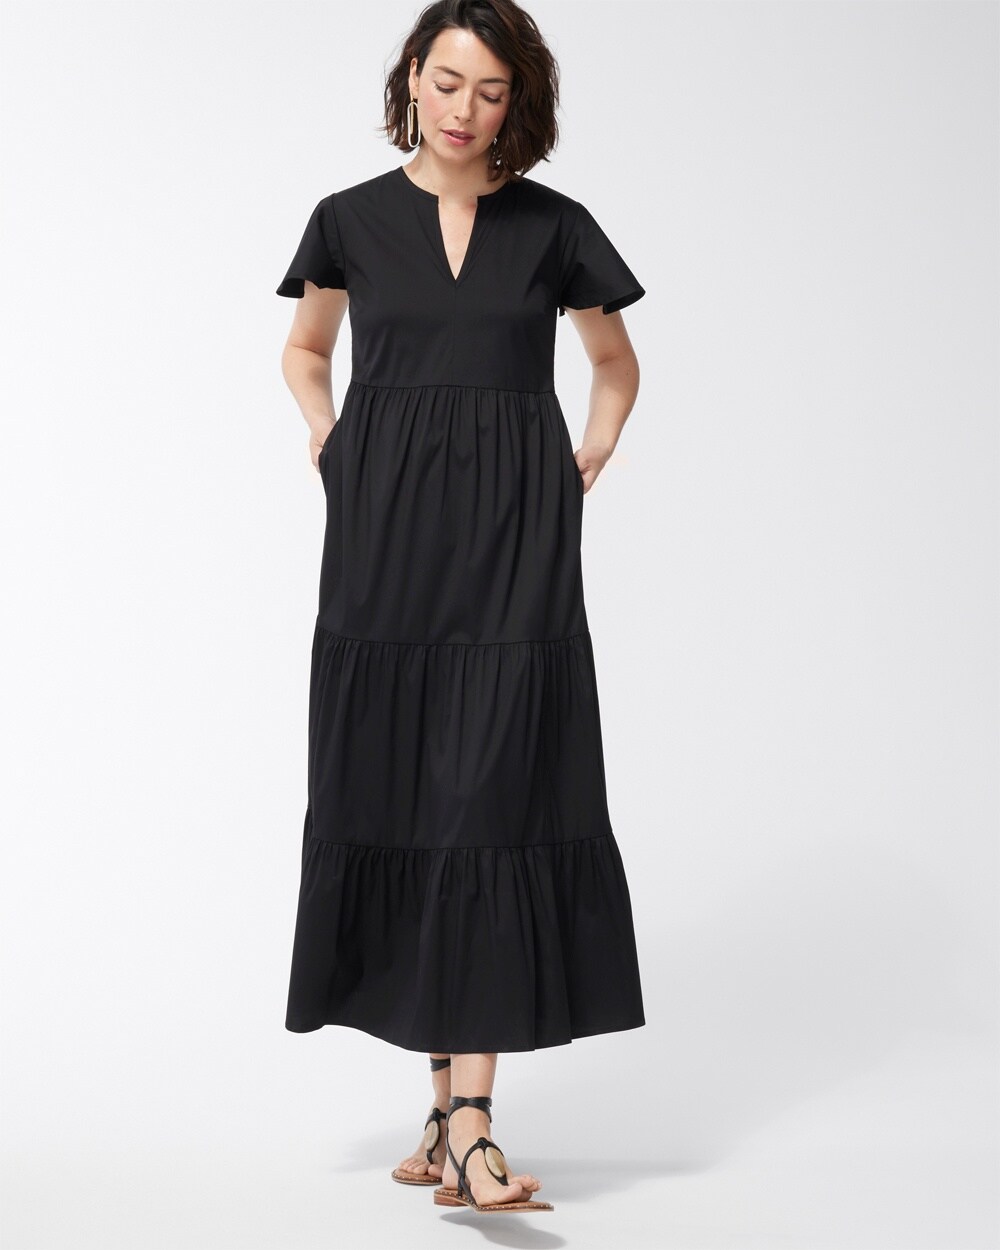 Af storm Prædike Outlook Petite Tiered Maxi Dress - Chico's